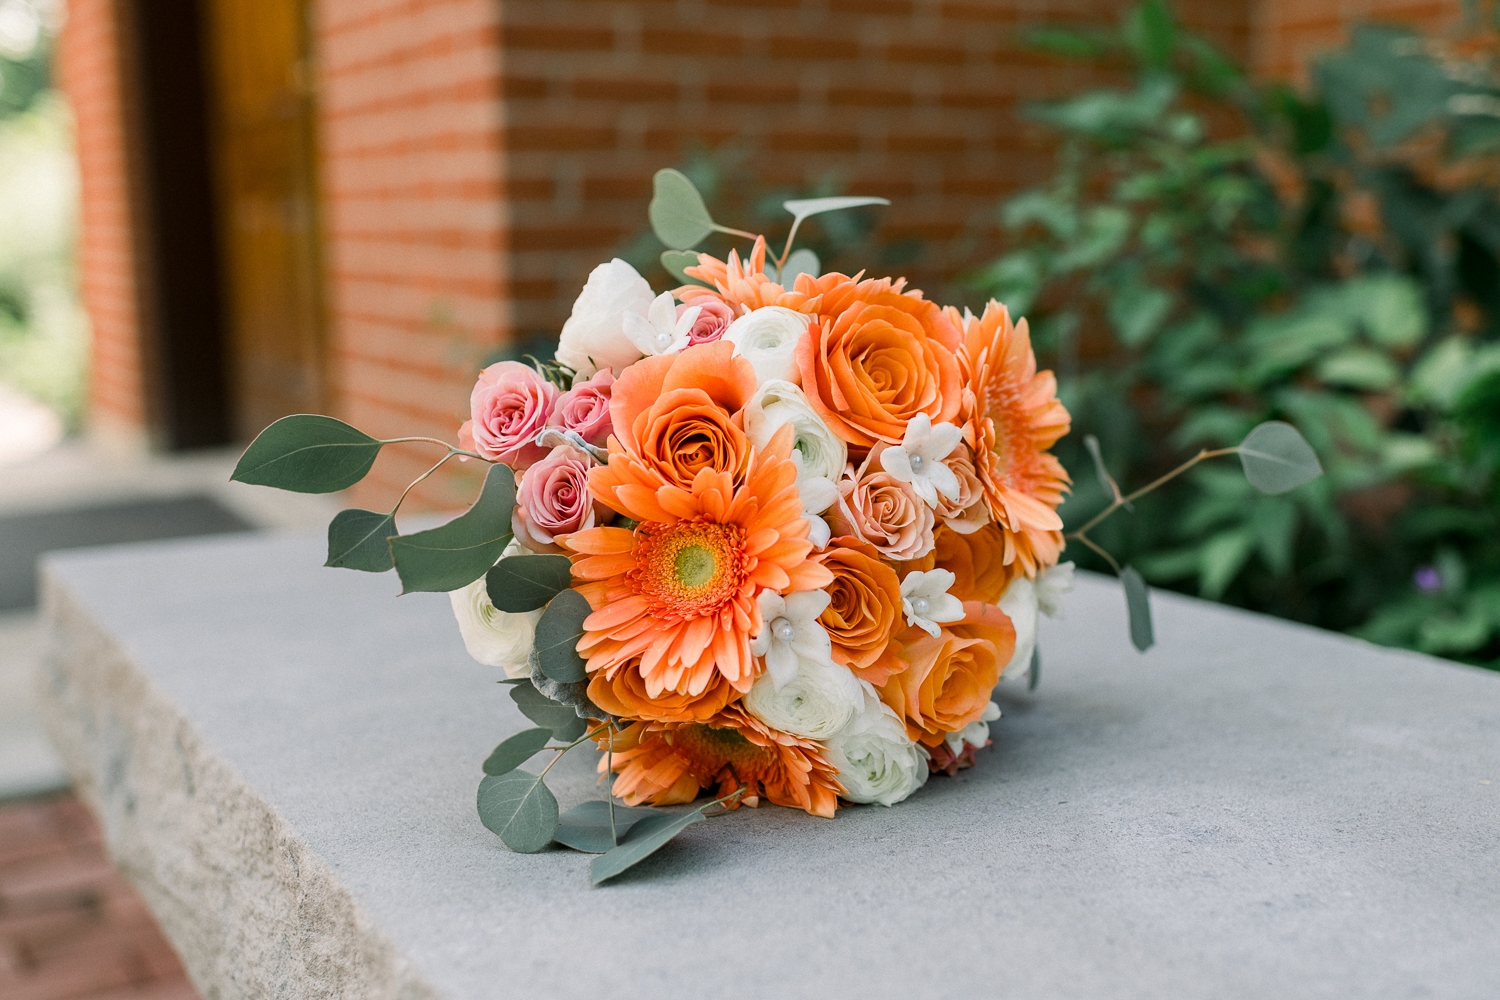 Orang and white floral arrangement for the bridal bouquet